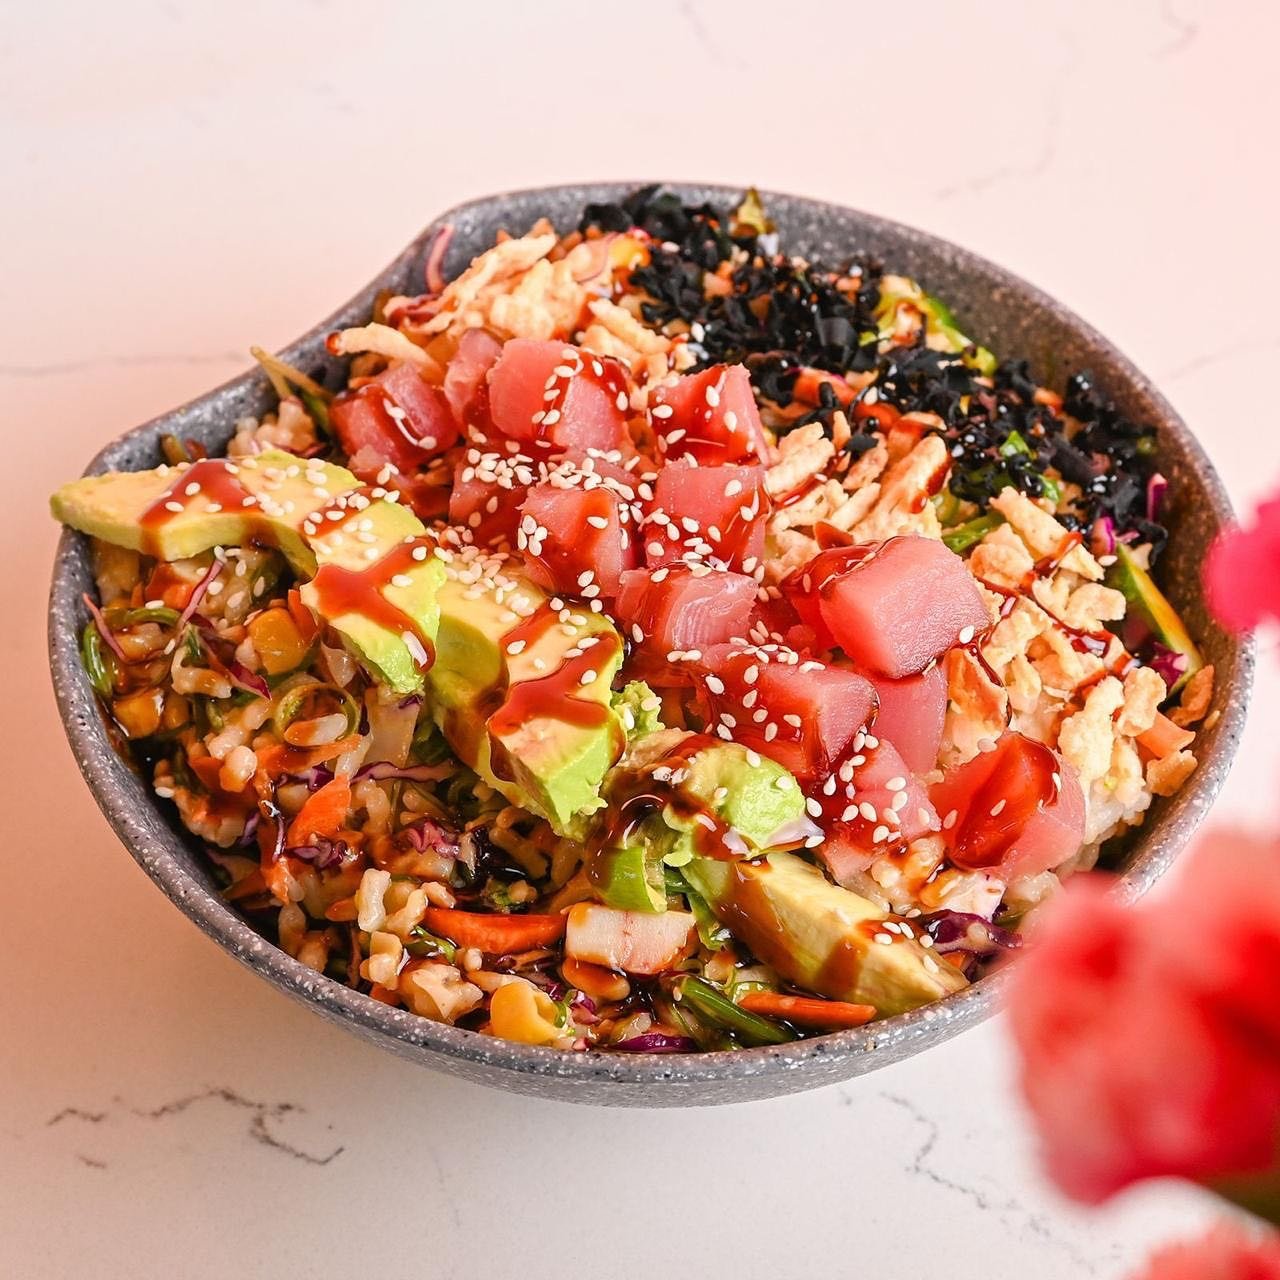 Dive into a sea of flavor with our Cali style tuna poke bowl! 🐟 Fresh, vibrant, and oh-so-satisfying. Come taste the ocean at @juiceus_ ! 🌊🥢 

Order now through @juiceus_ app! Link in bio.

#rgv #rgvfood #area956 #instahealthy #juice #healthylifes